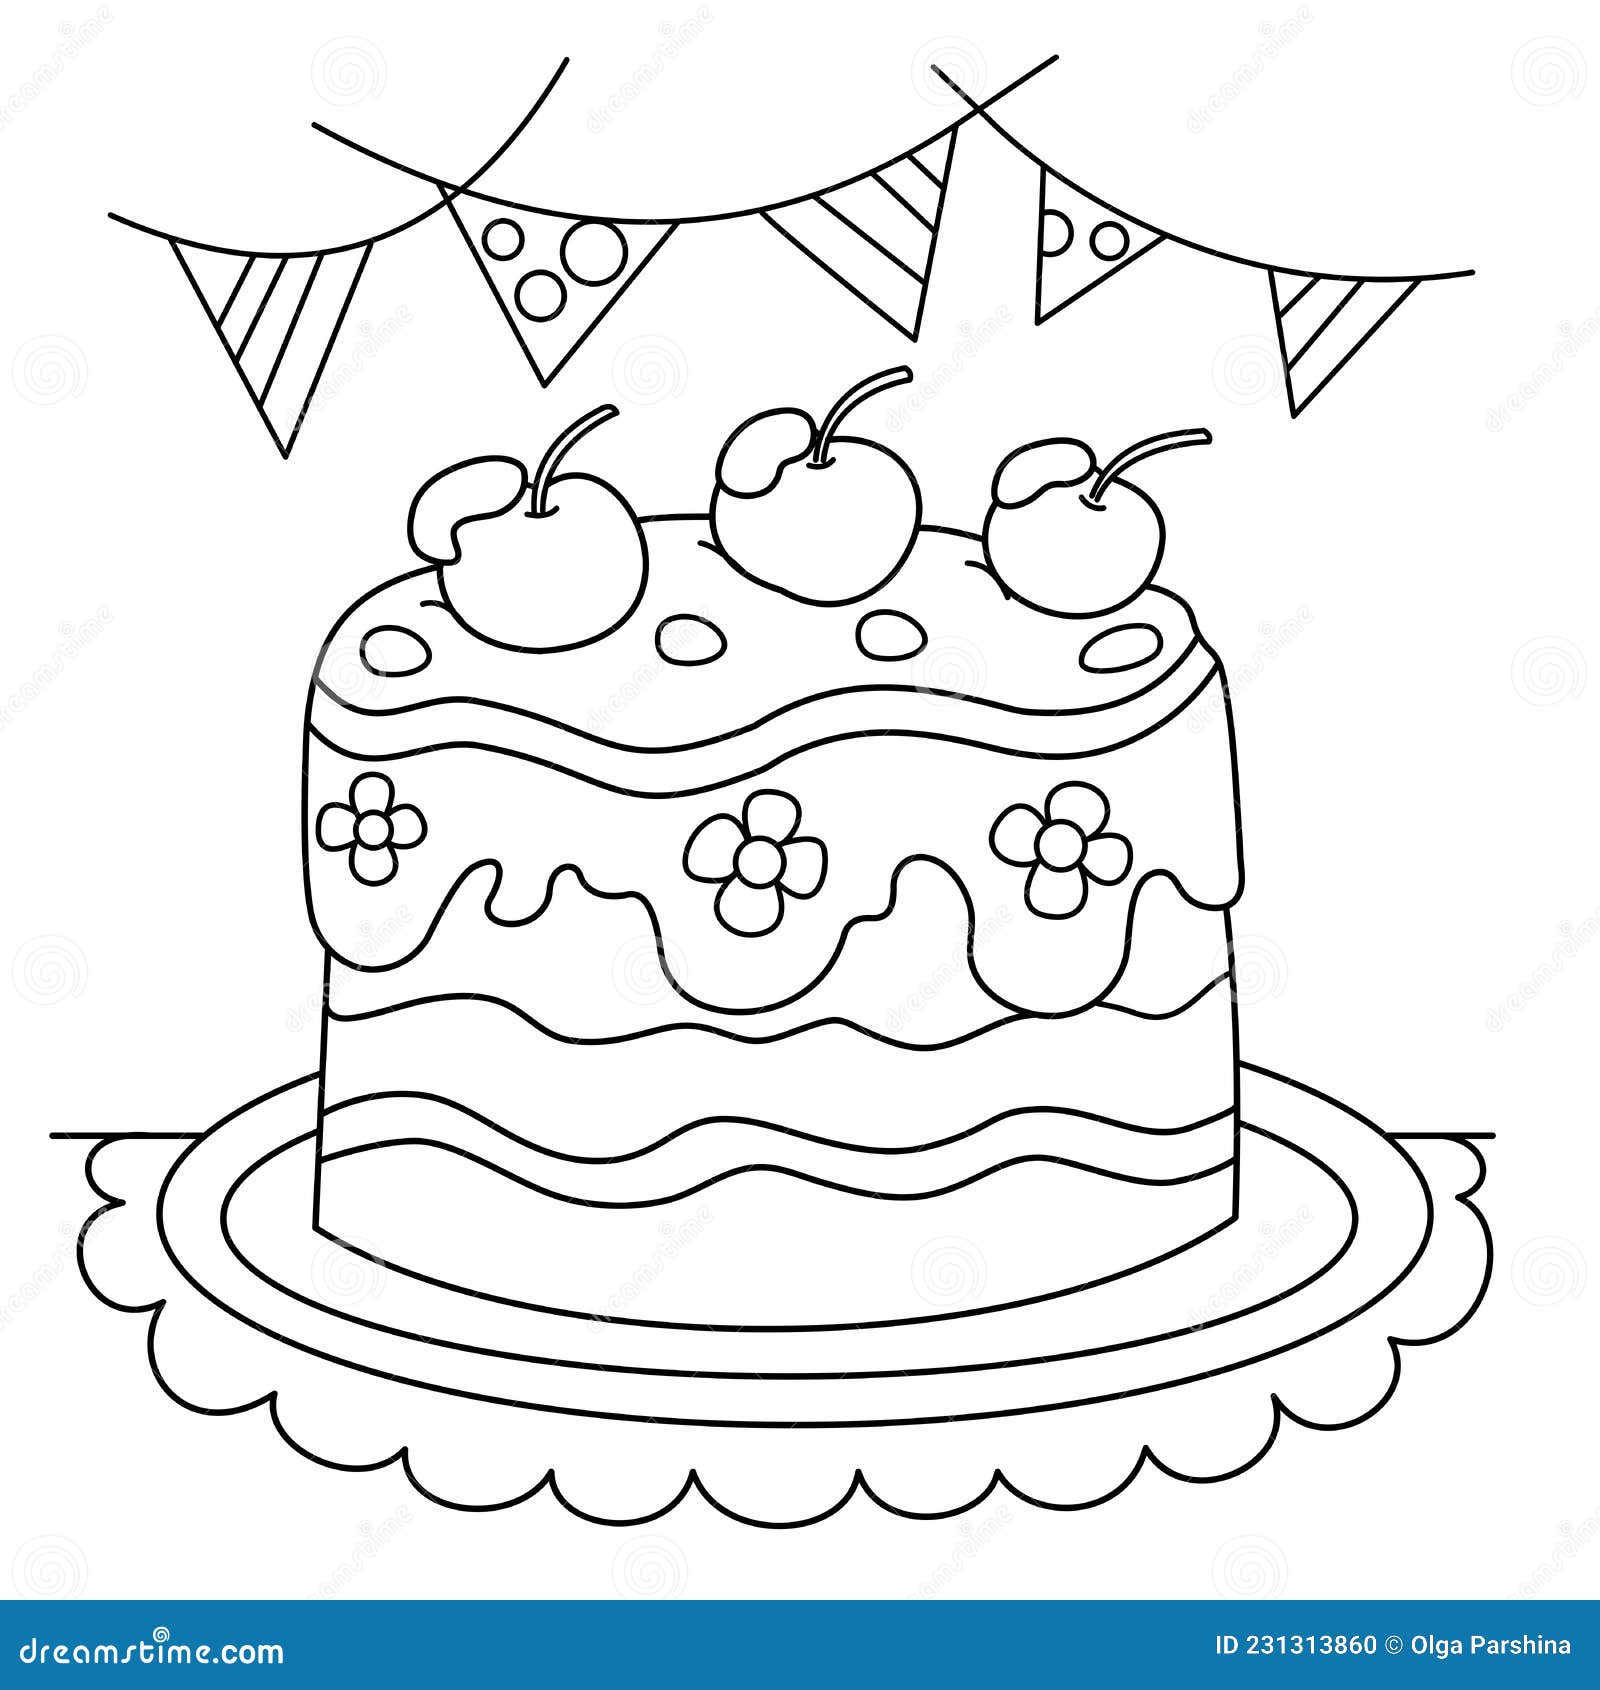 coloring page outline of holiday cake. food and sweetness. coloring book for kids